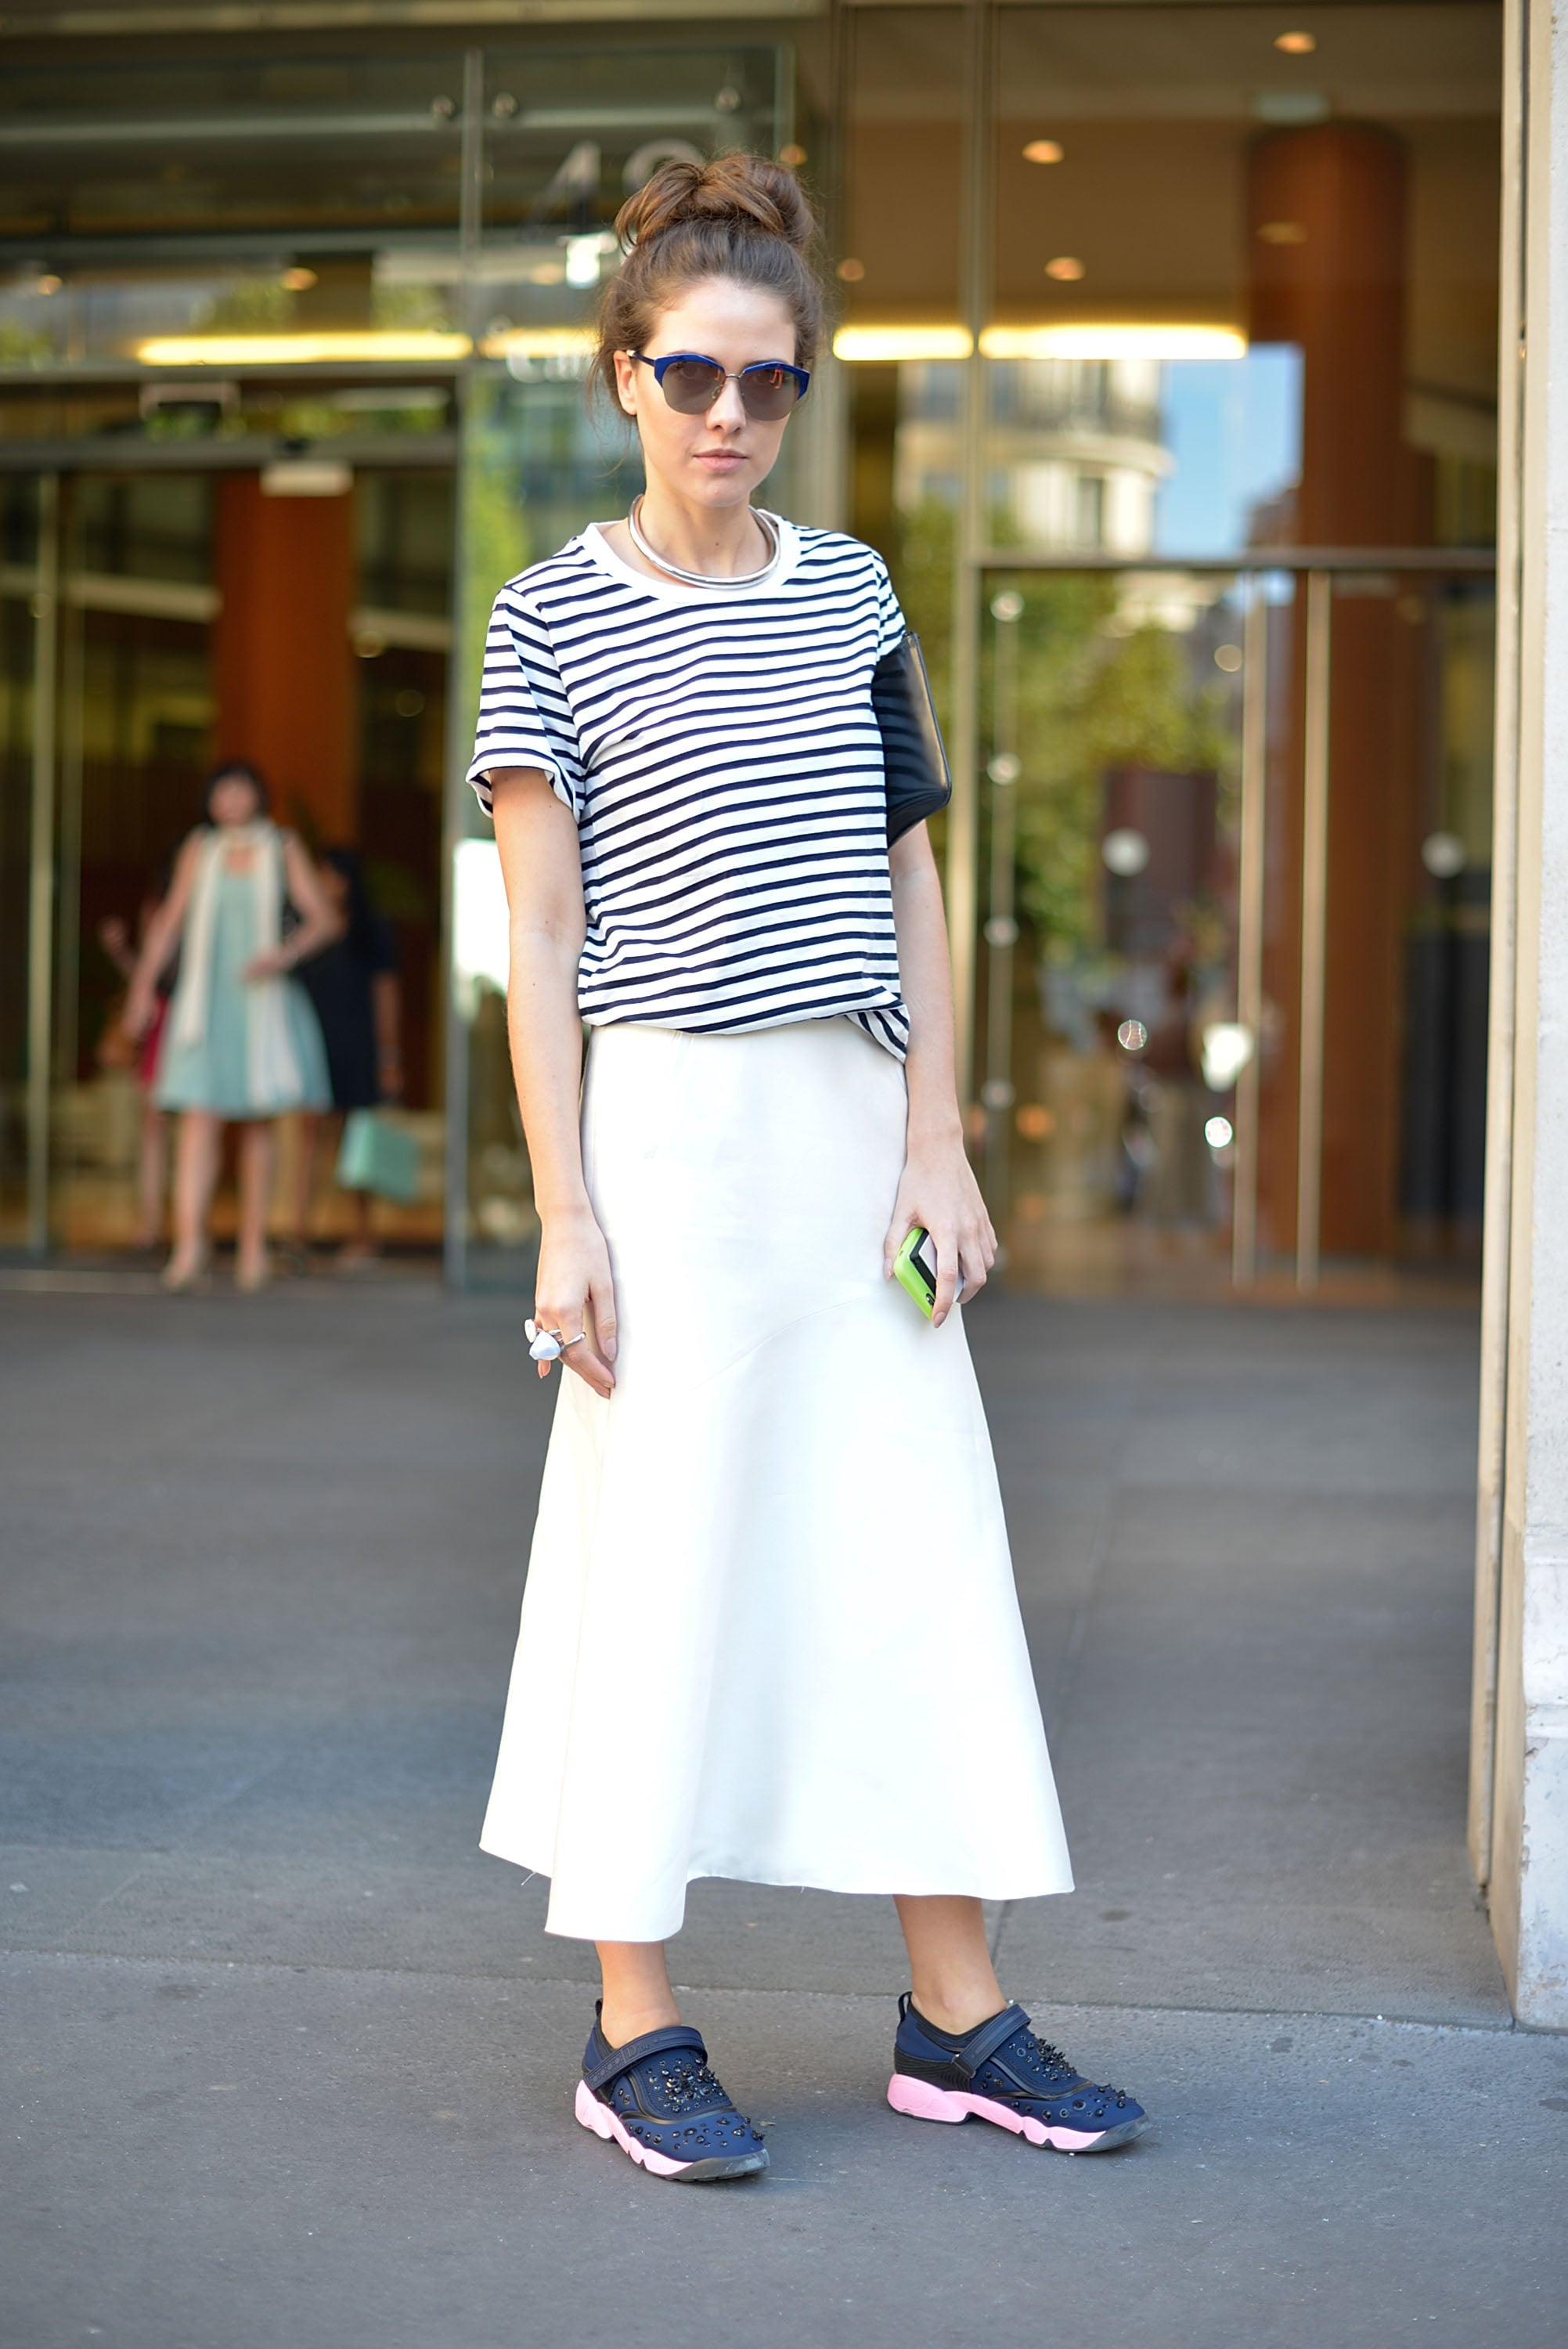 maxi skirt with sneakers outfit